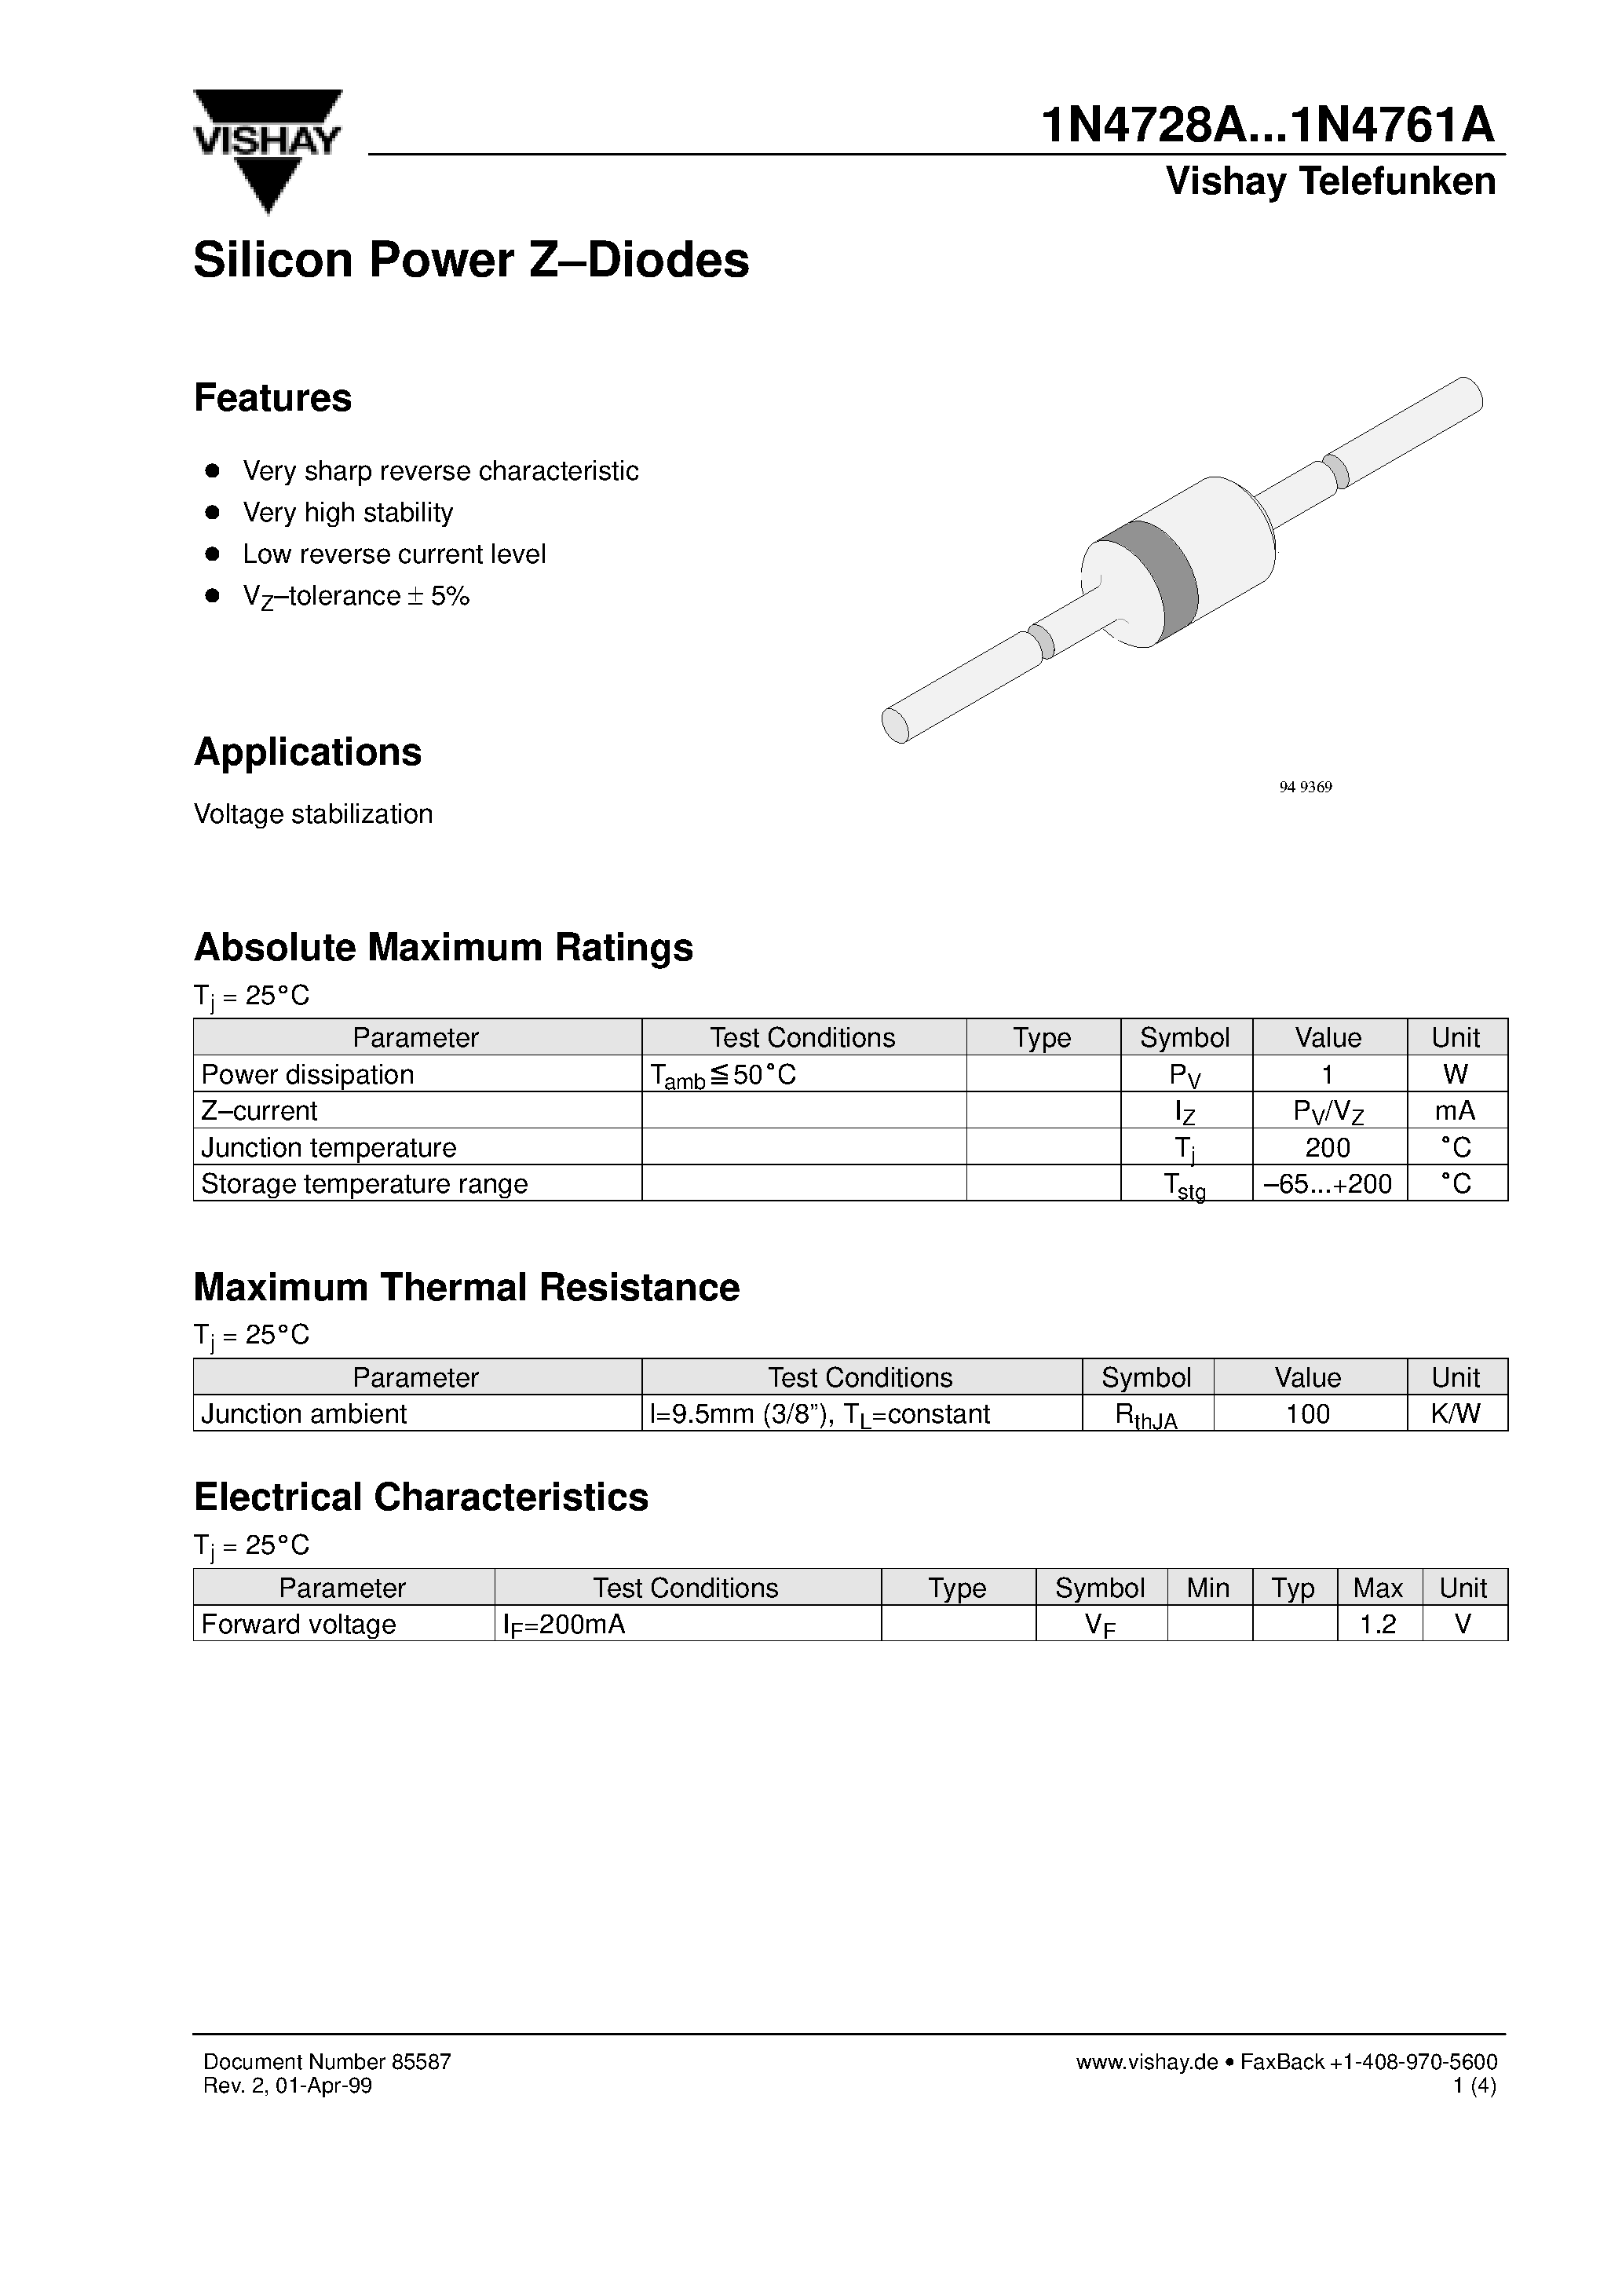 Datasheet 1N4761A - Silicon Power Z-Diodes page 1